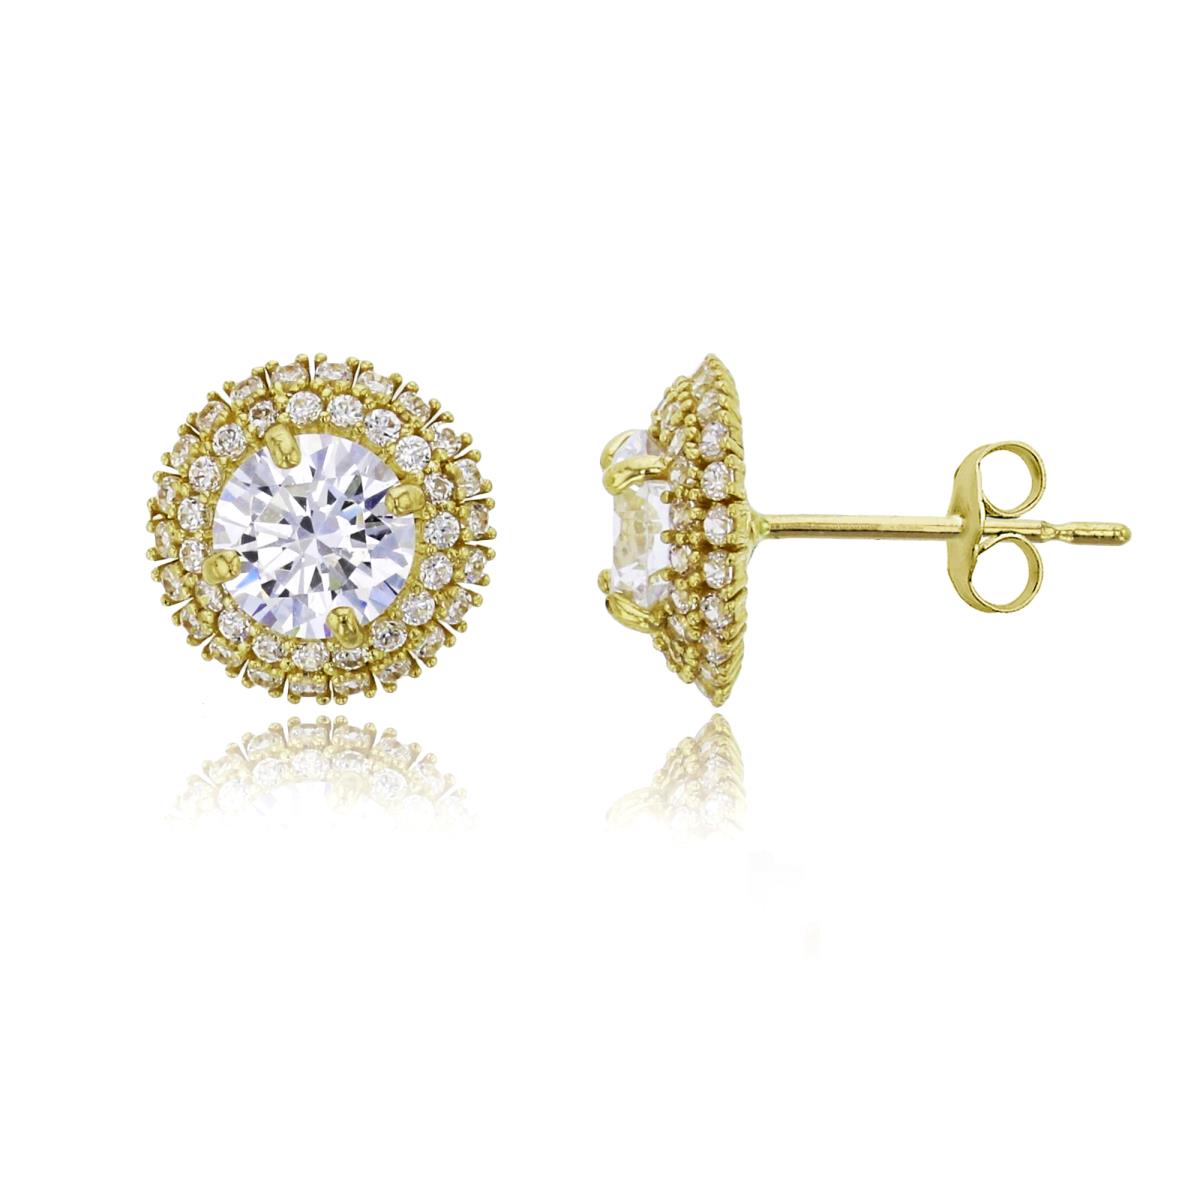 14K Yellow Gold 5.25mm Round Cut Double Halo Domed Stud Earring with 14K Clutch